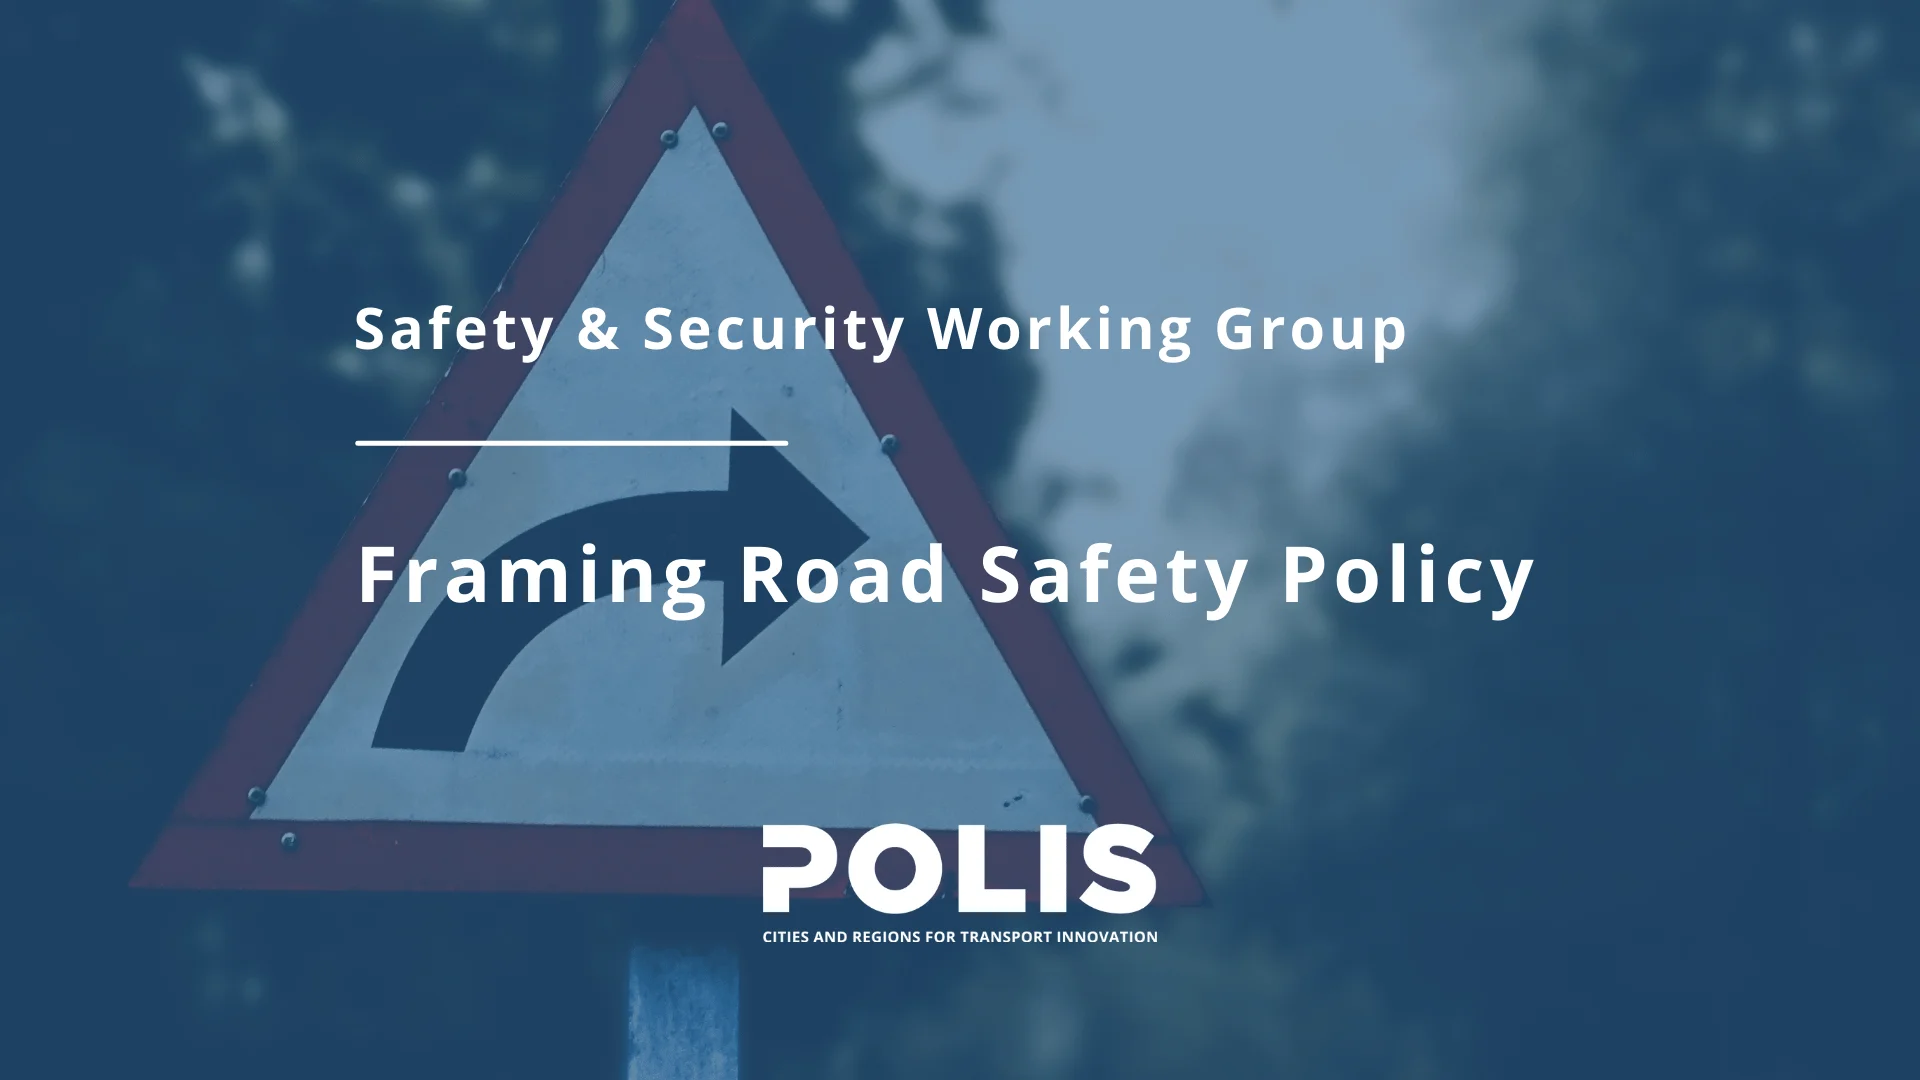 Safety & Security Working Group: Framing Road Safety Policy